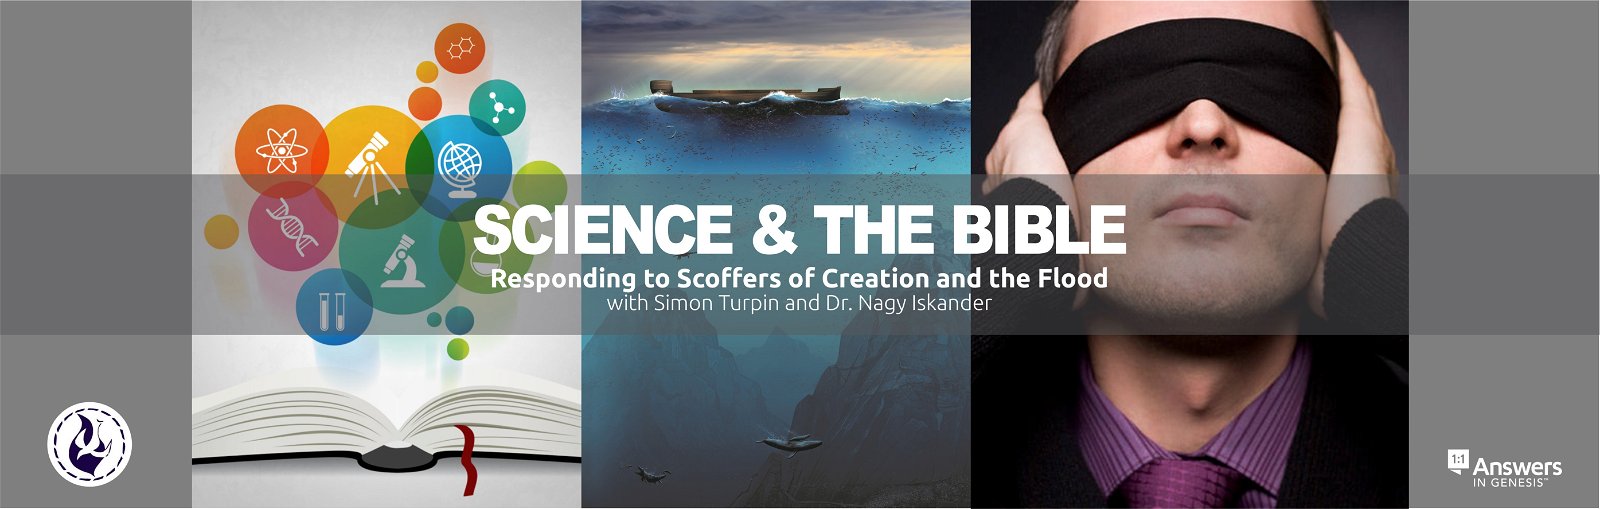 Science & The Bible Conference